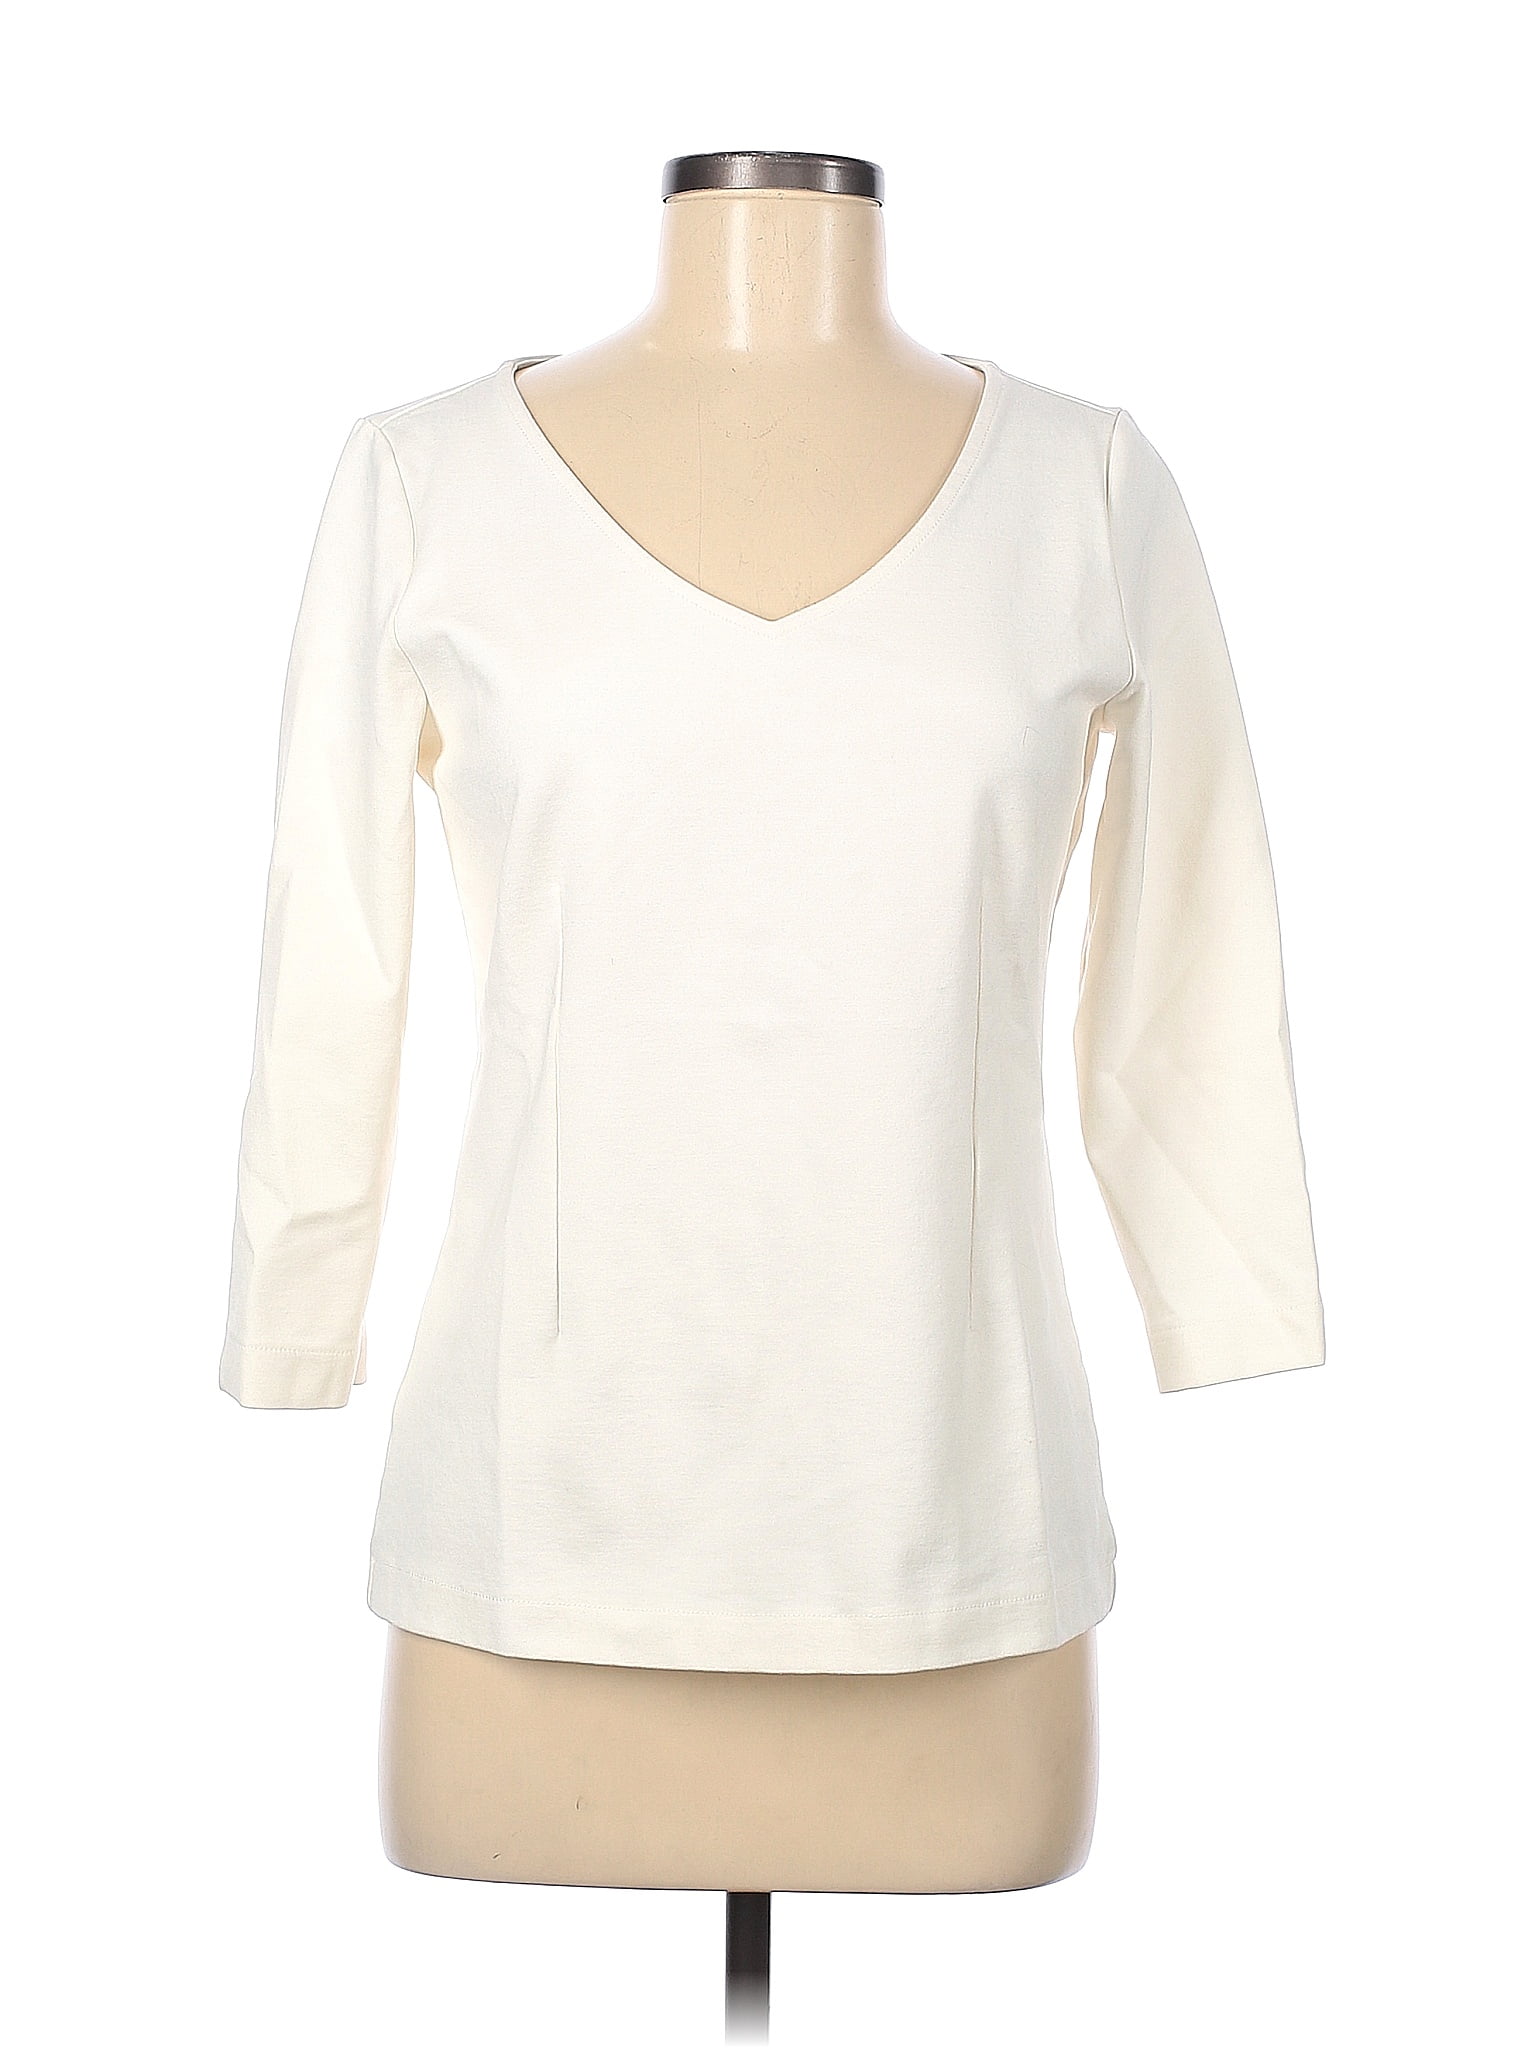 Ann Taylor Factory Solid Ivory 3/4 Sleeve Top Size M - 36% off | thredUP